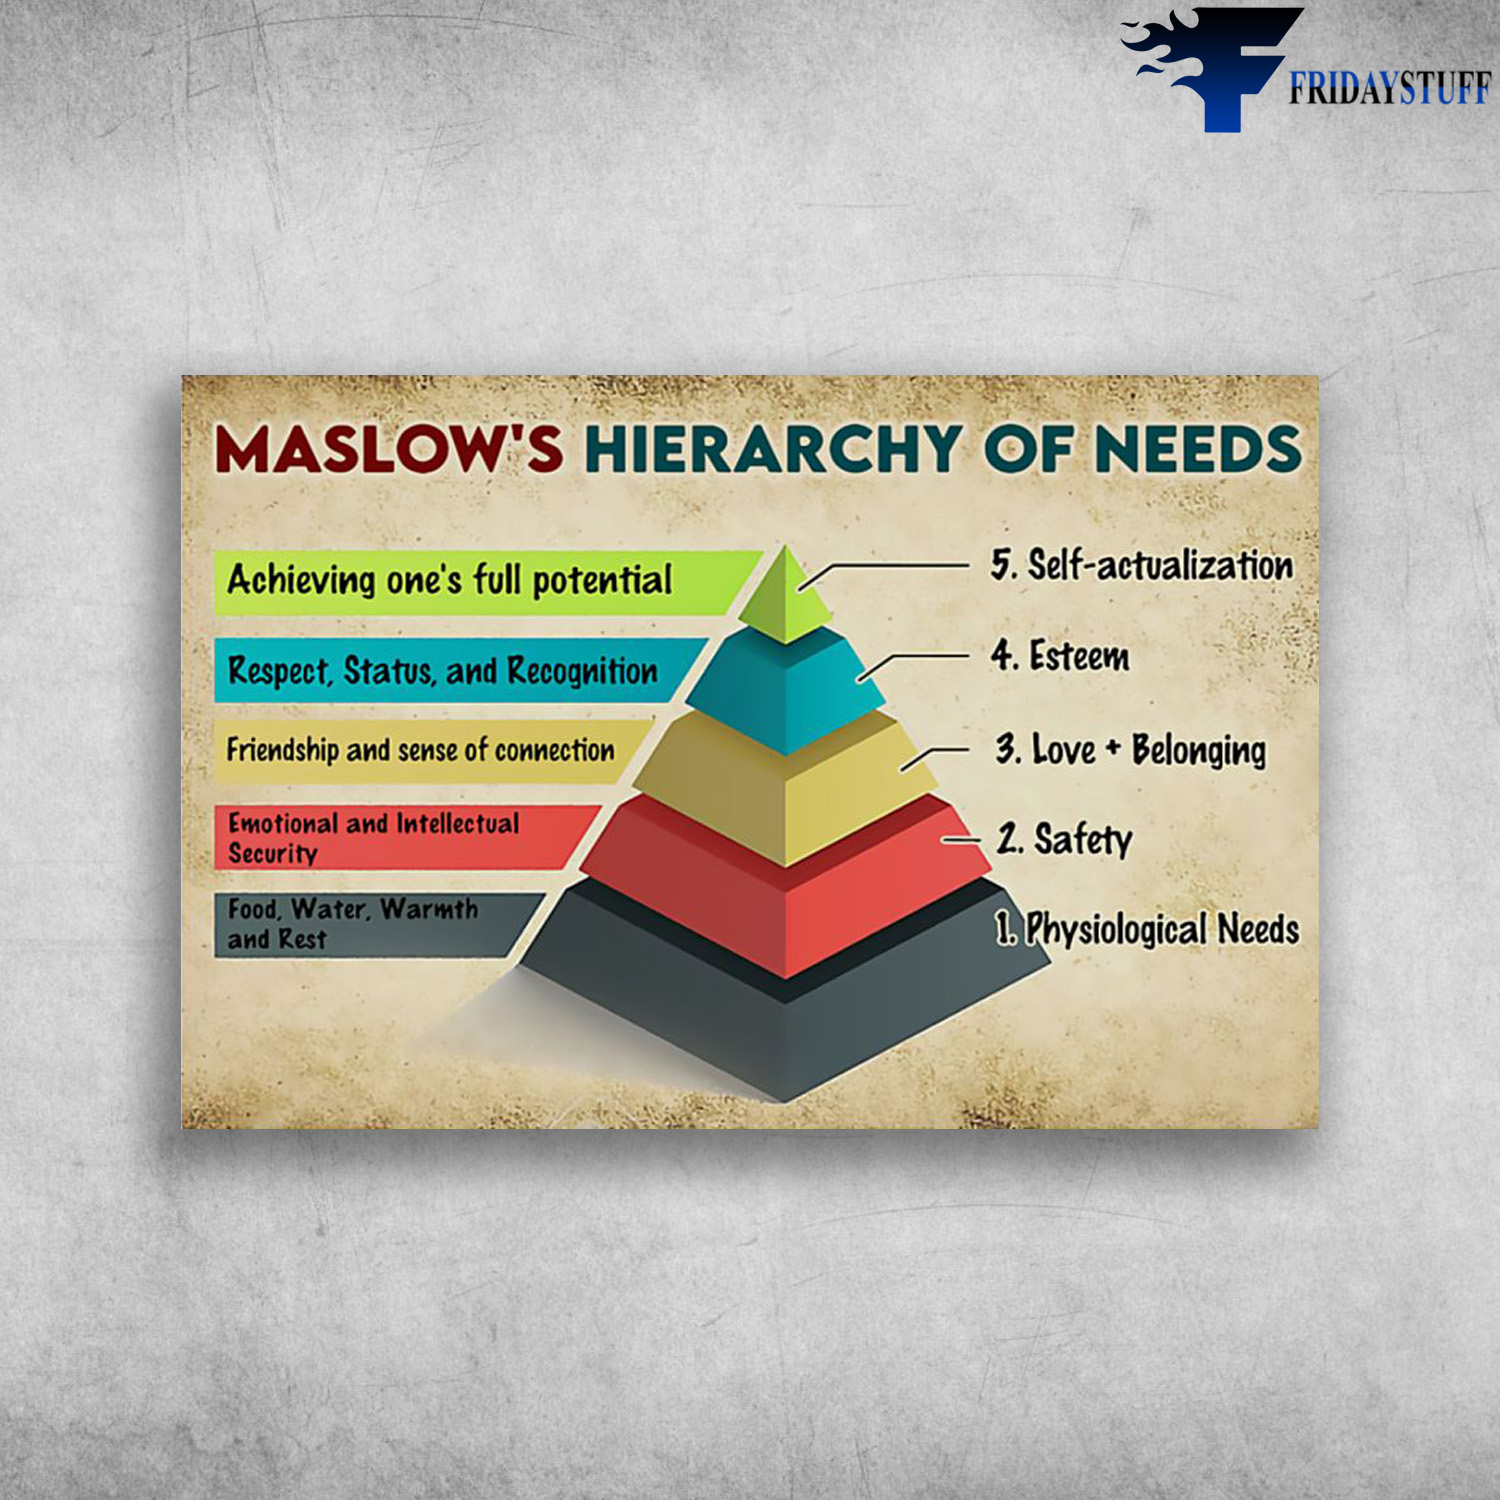 Maslow's Hierarchy Of Needs - Achieving One's Full Potential, Respect, Status, Anf Recognition, Friendship And Sence Of Connection, Emotional And Intellectual Security, Food, Water, Warmth And Rest